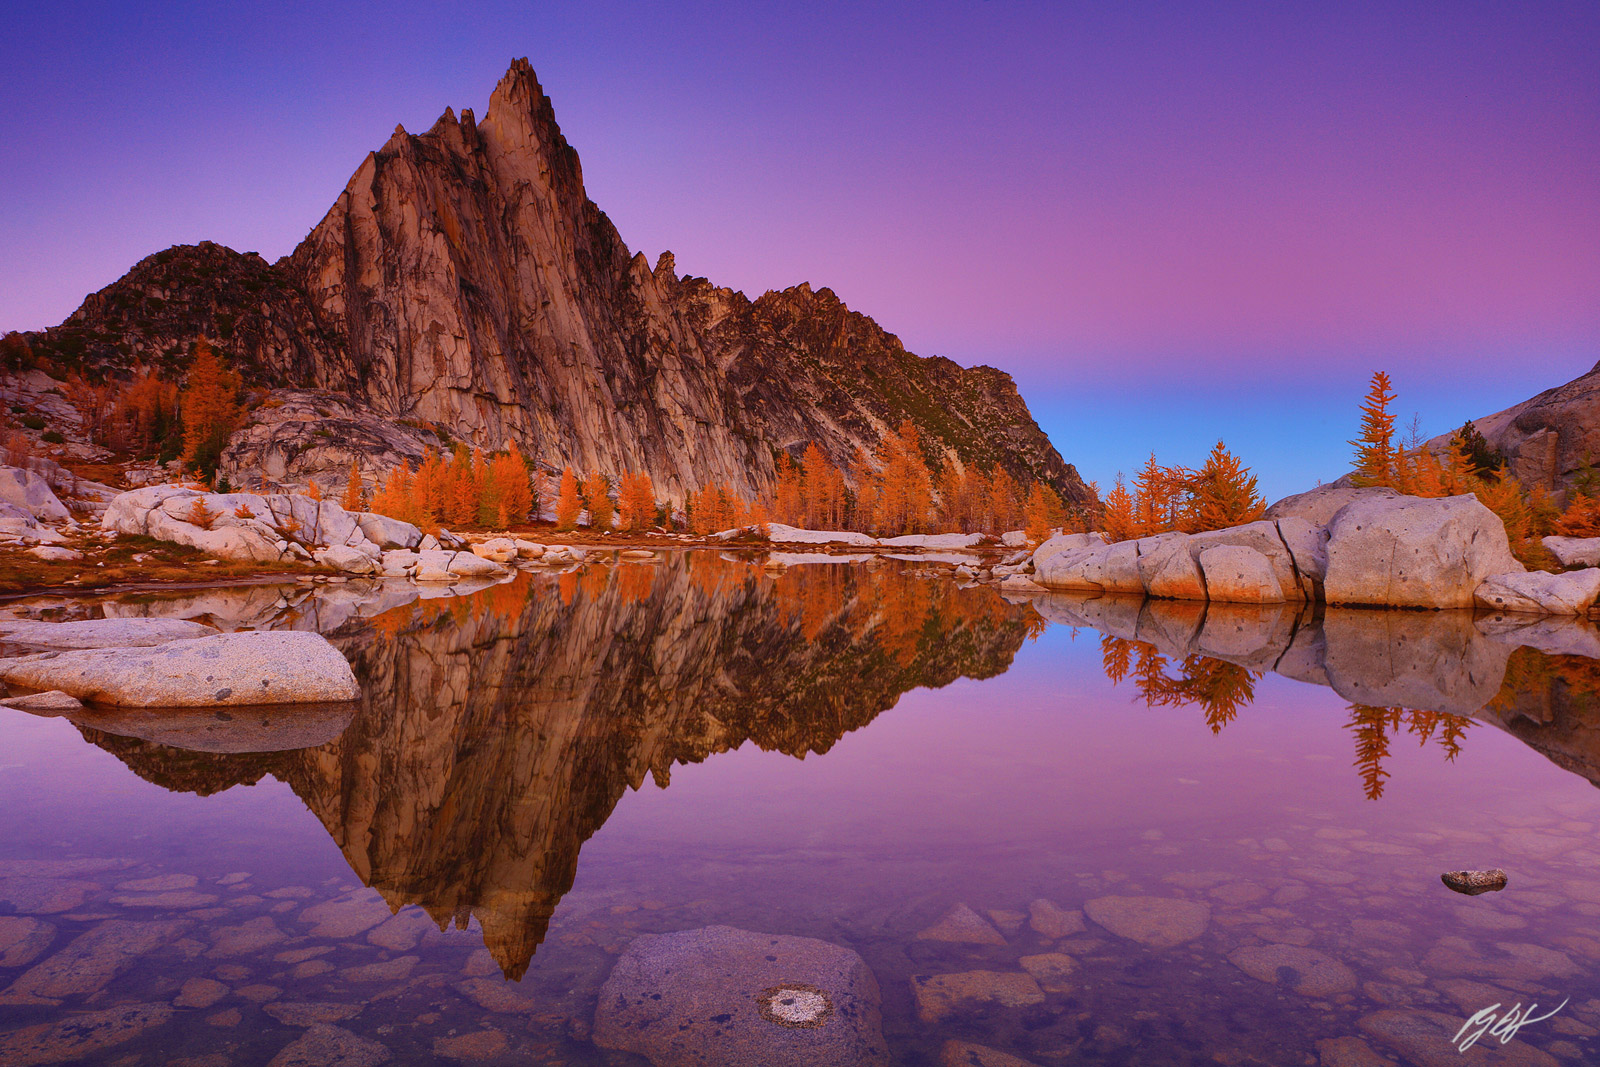 Sunset Prusik Peak Reflected in Gnome Tarn in the Enchantments, Alpine Lakes Wilderness in Washington